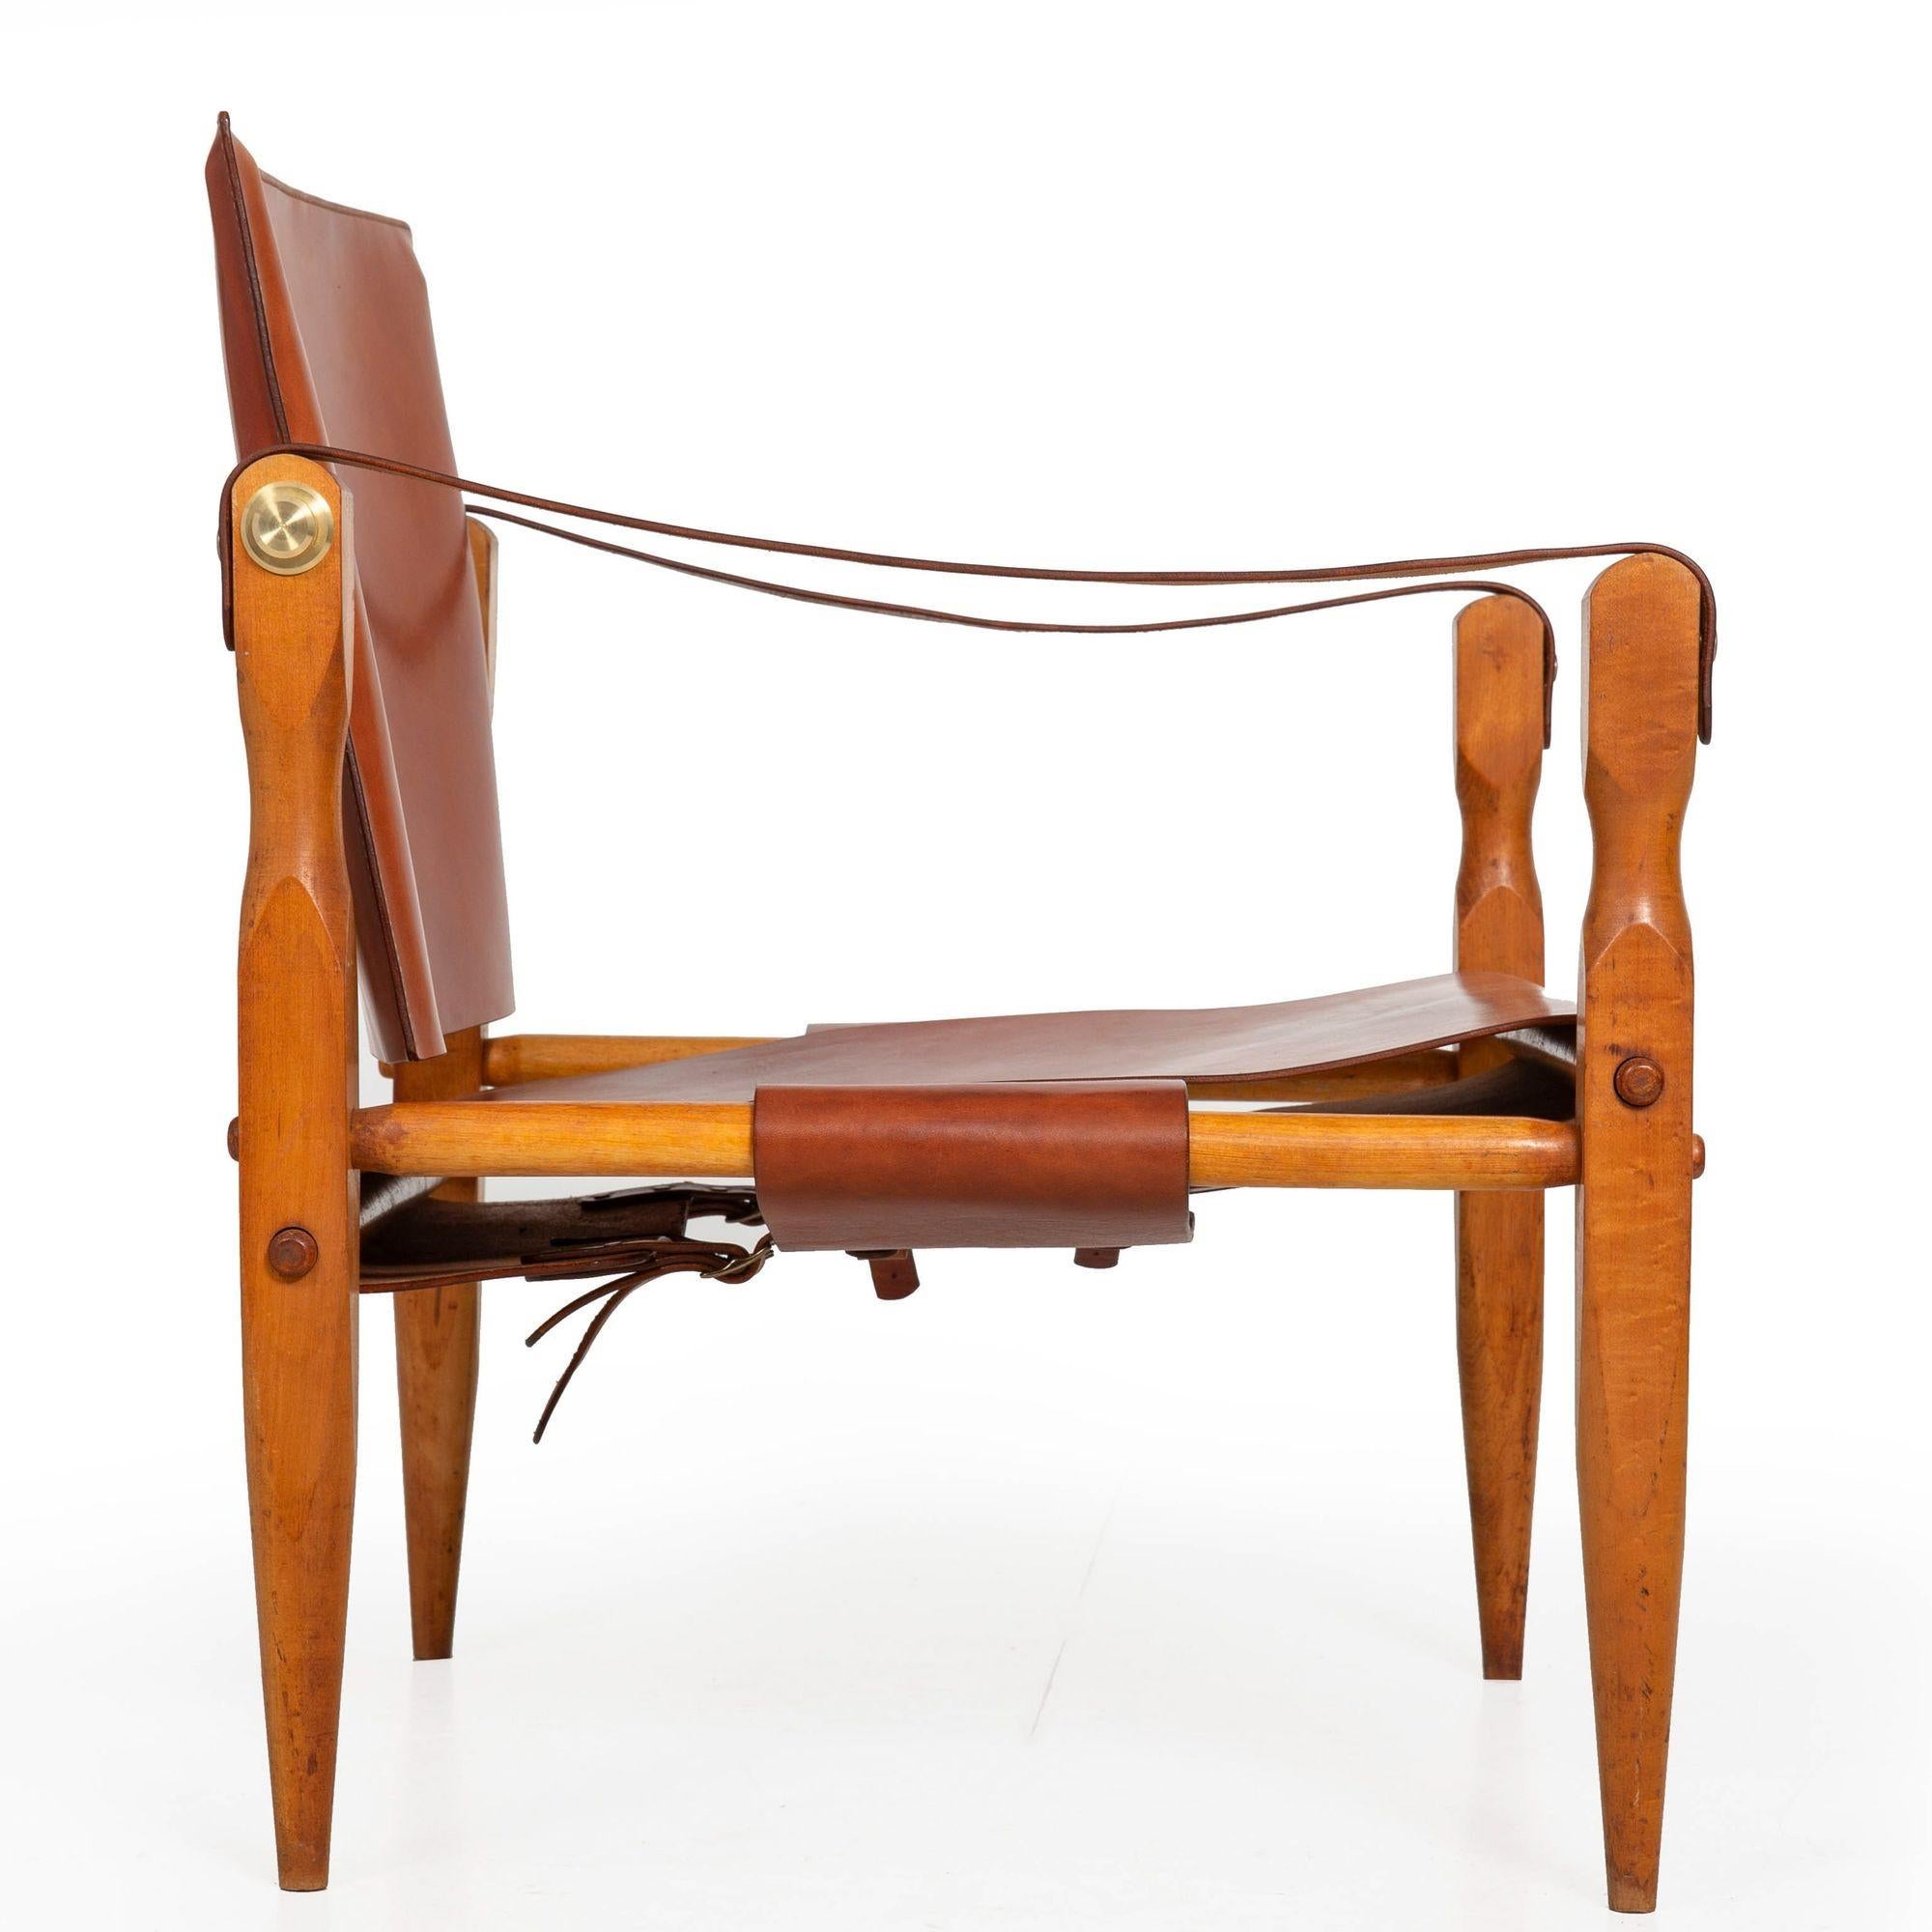 Circa 1970 Mid-Century Modern Leather Safari Chair attr. to Wilhelm Kienzle In Good Condition For Sale In Shippensburg, PA